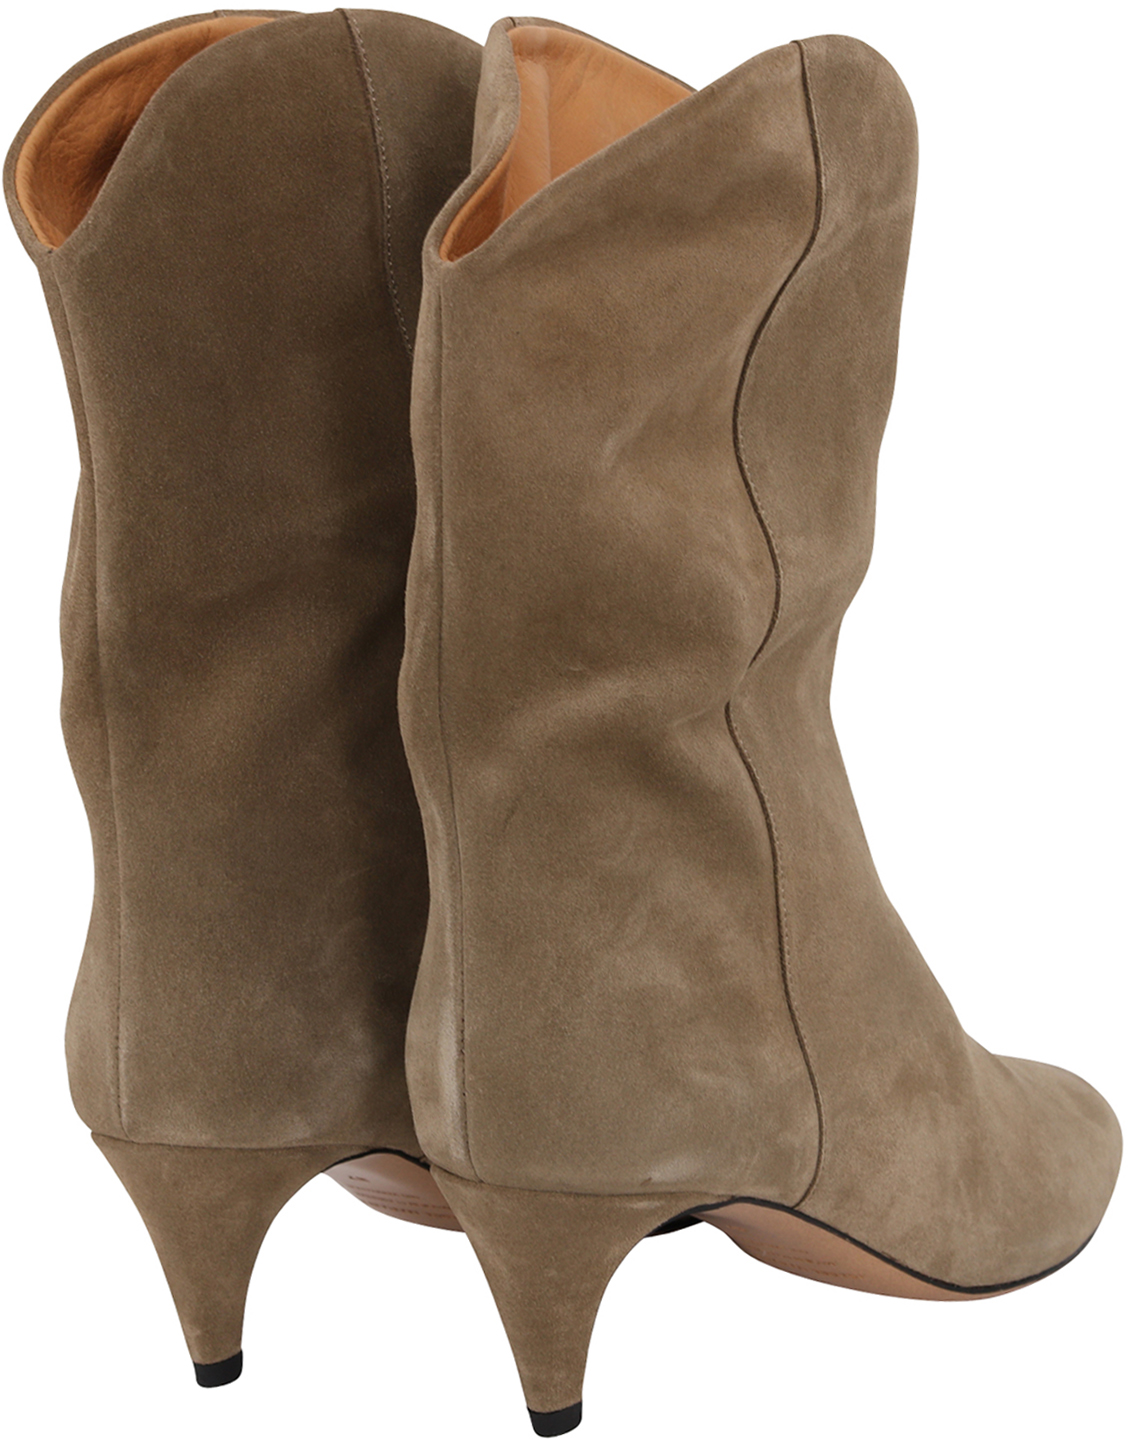 Isabel Marant High Boots Dernee Taupe Suede 39